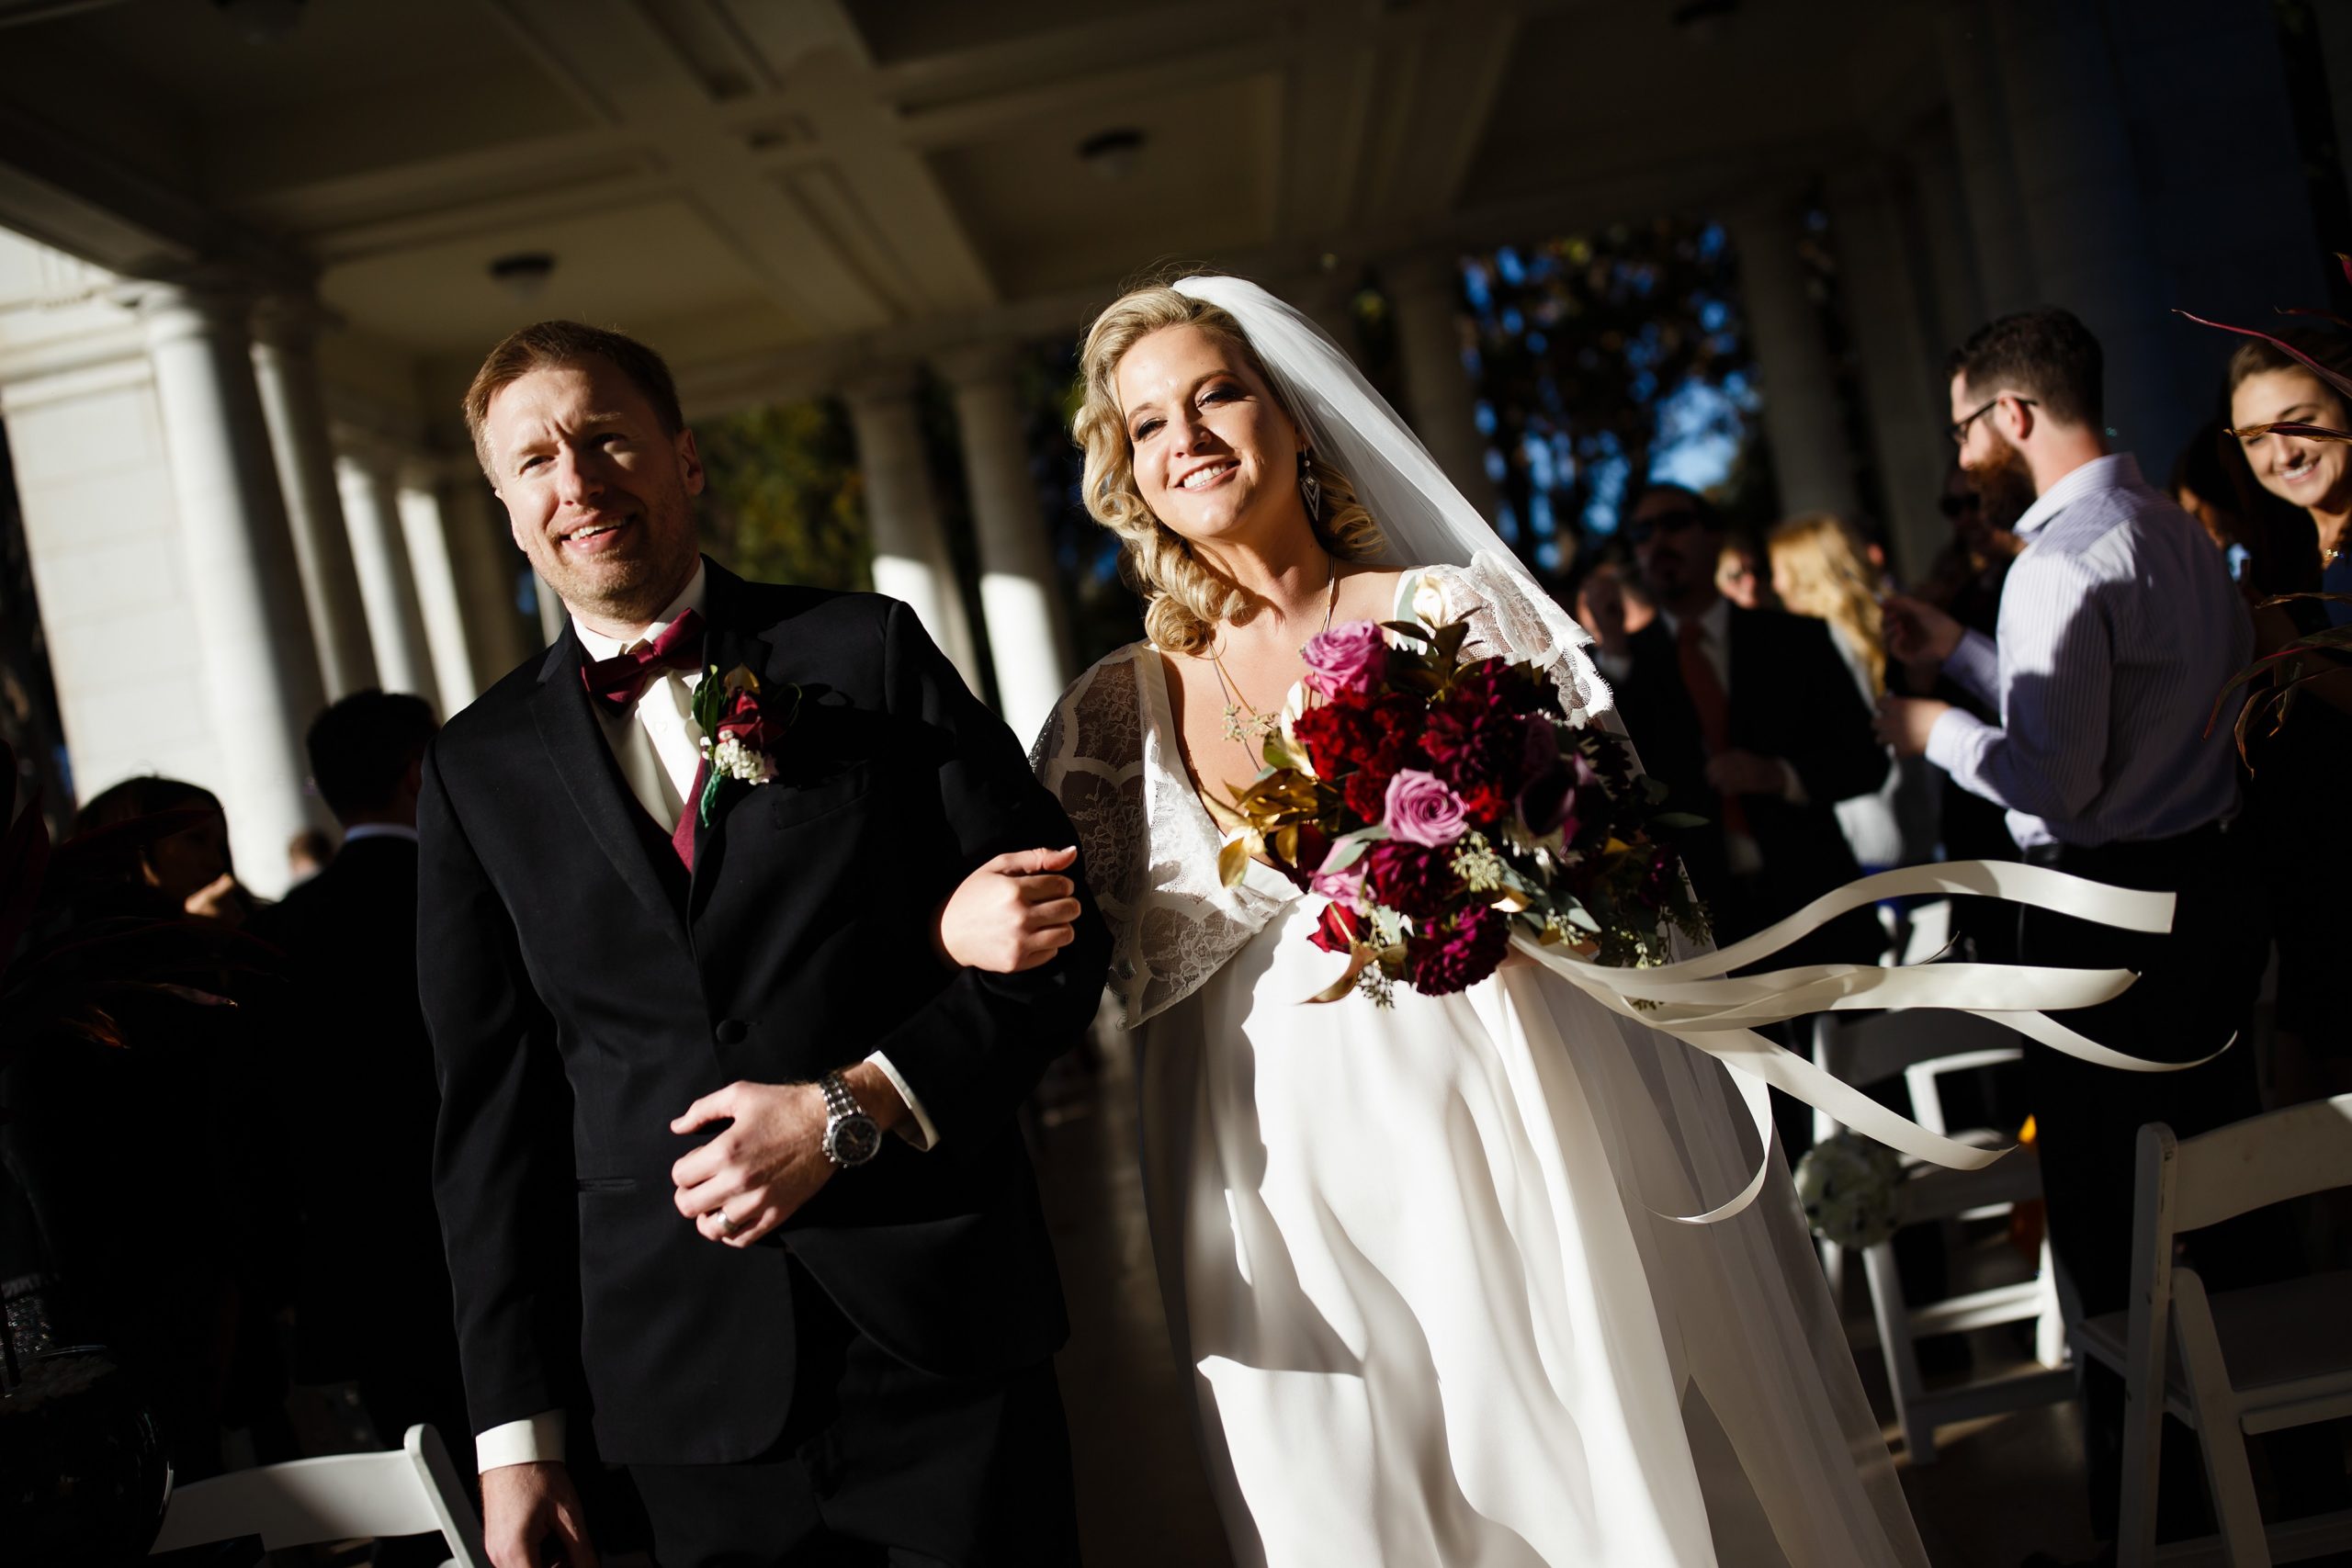 Ryan and Sarah walk down the aisle as husband and wife after their Cheesman Park wedding ceremony in Denver